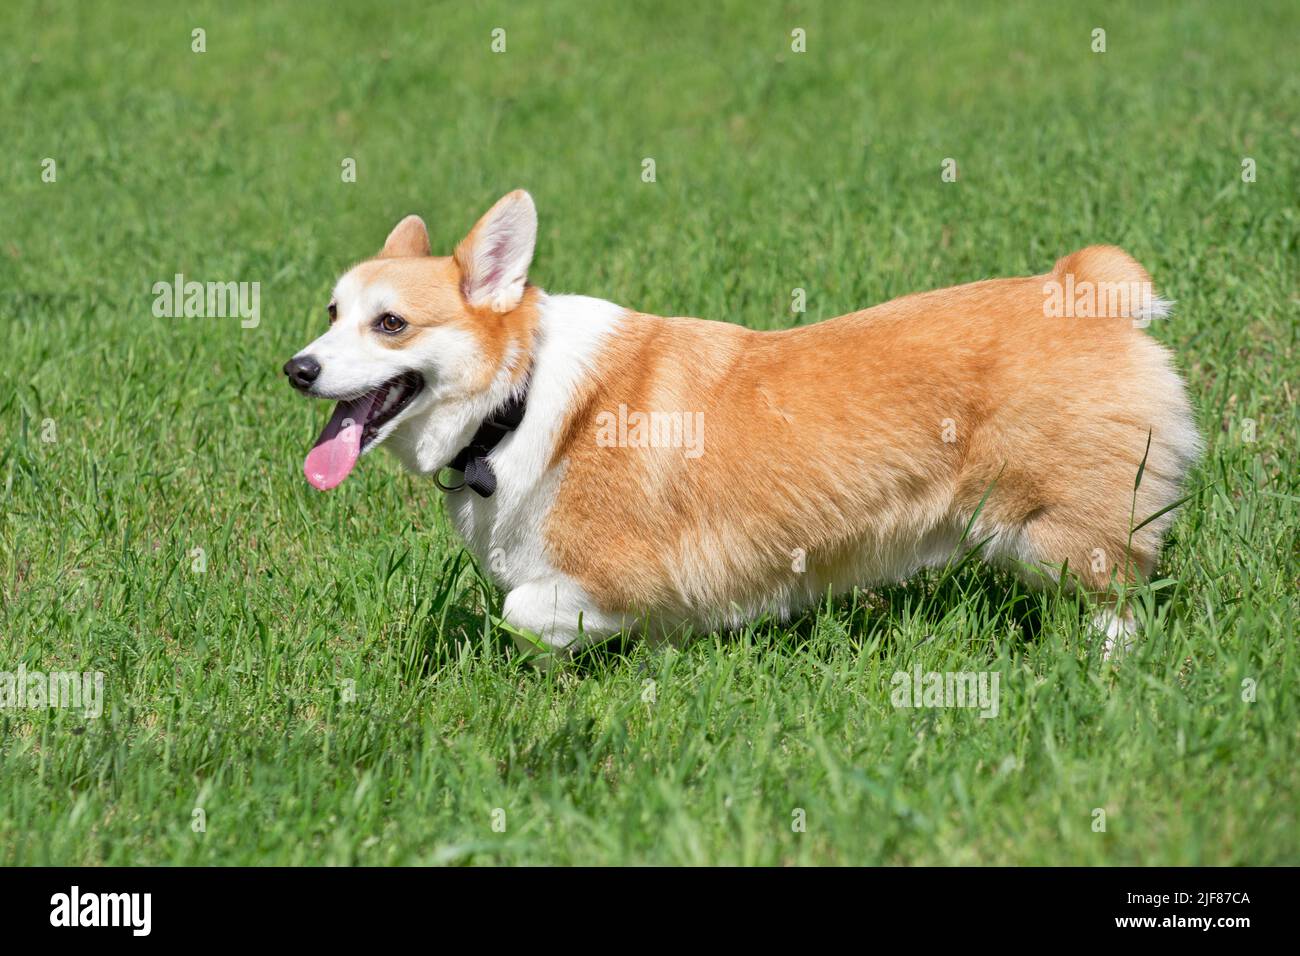 Pembroke welsh corgi puppy is standing on a green grass in the summer park. Pet animals. Purebred dog. Stock Photo